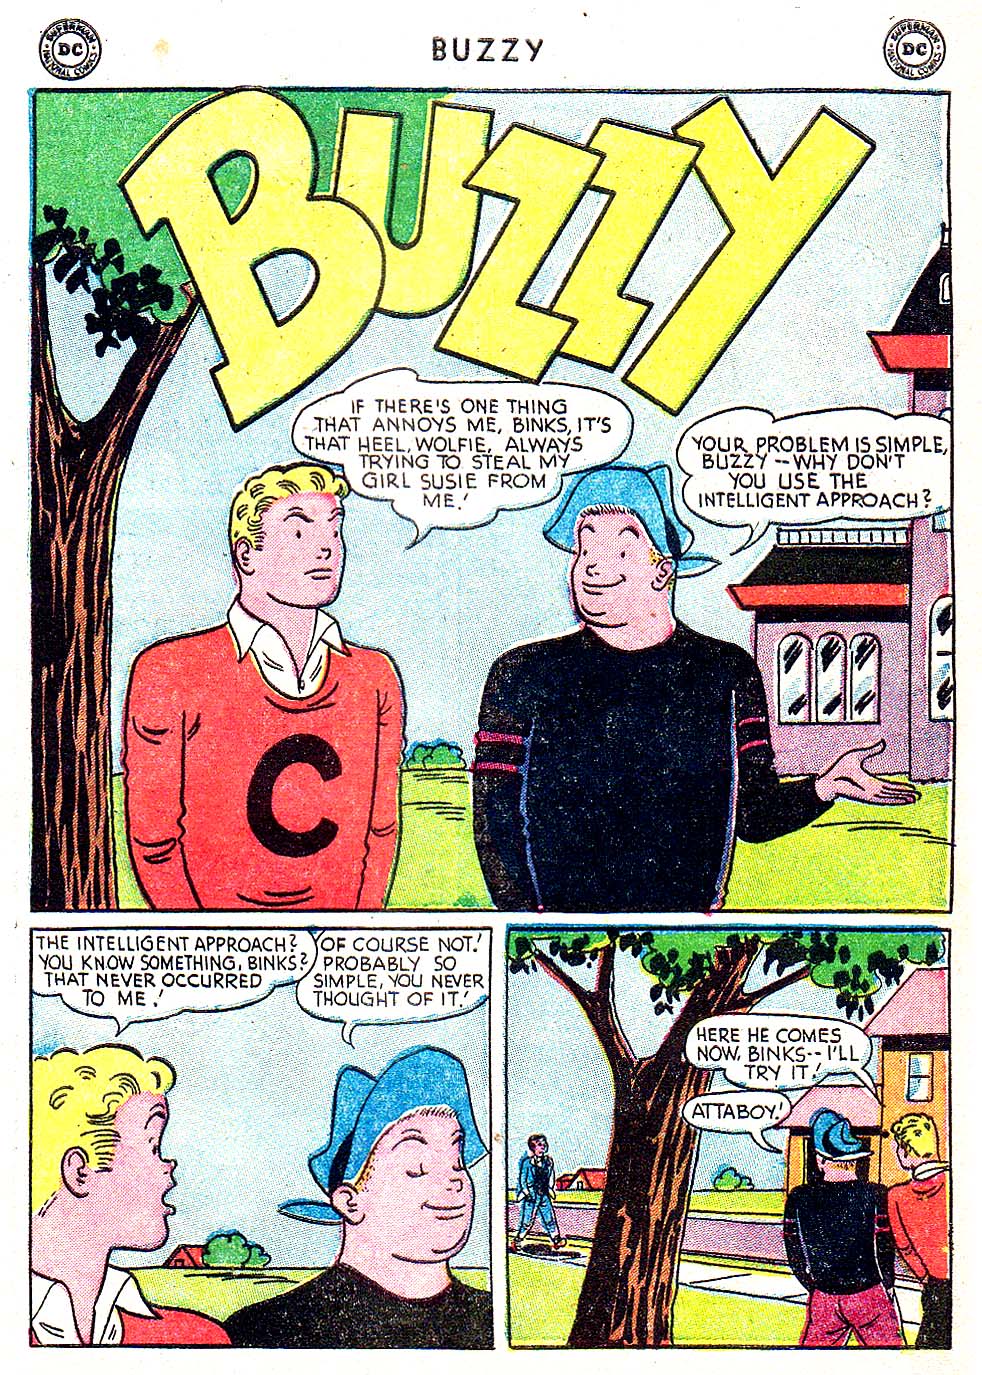 Read online Buzzy comic -  Issue #57 - 11